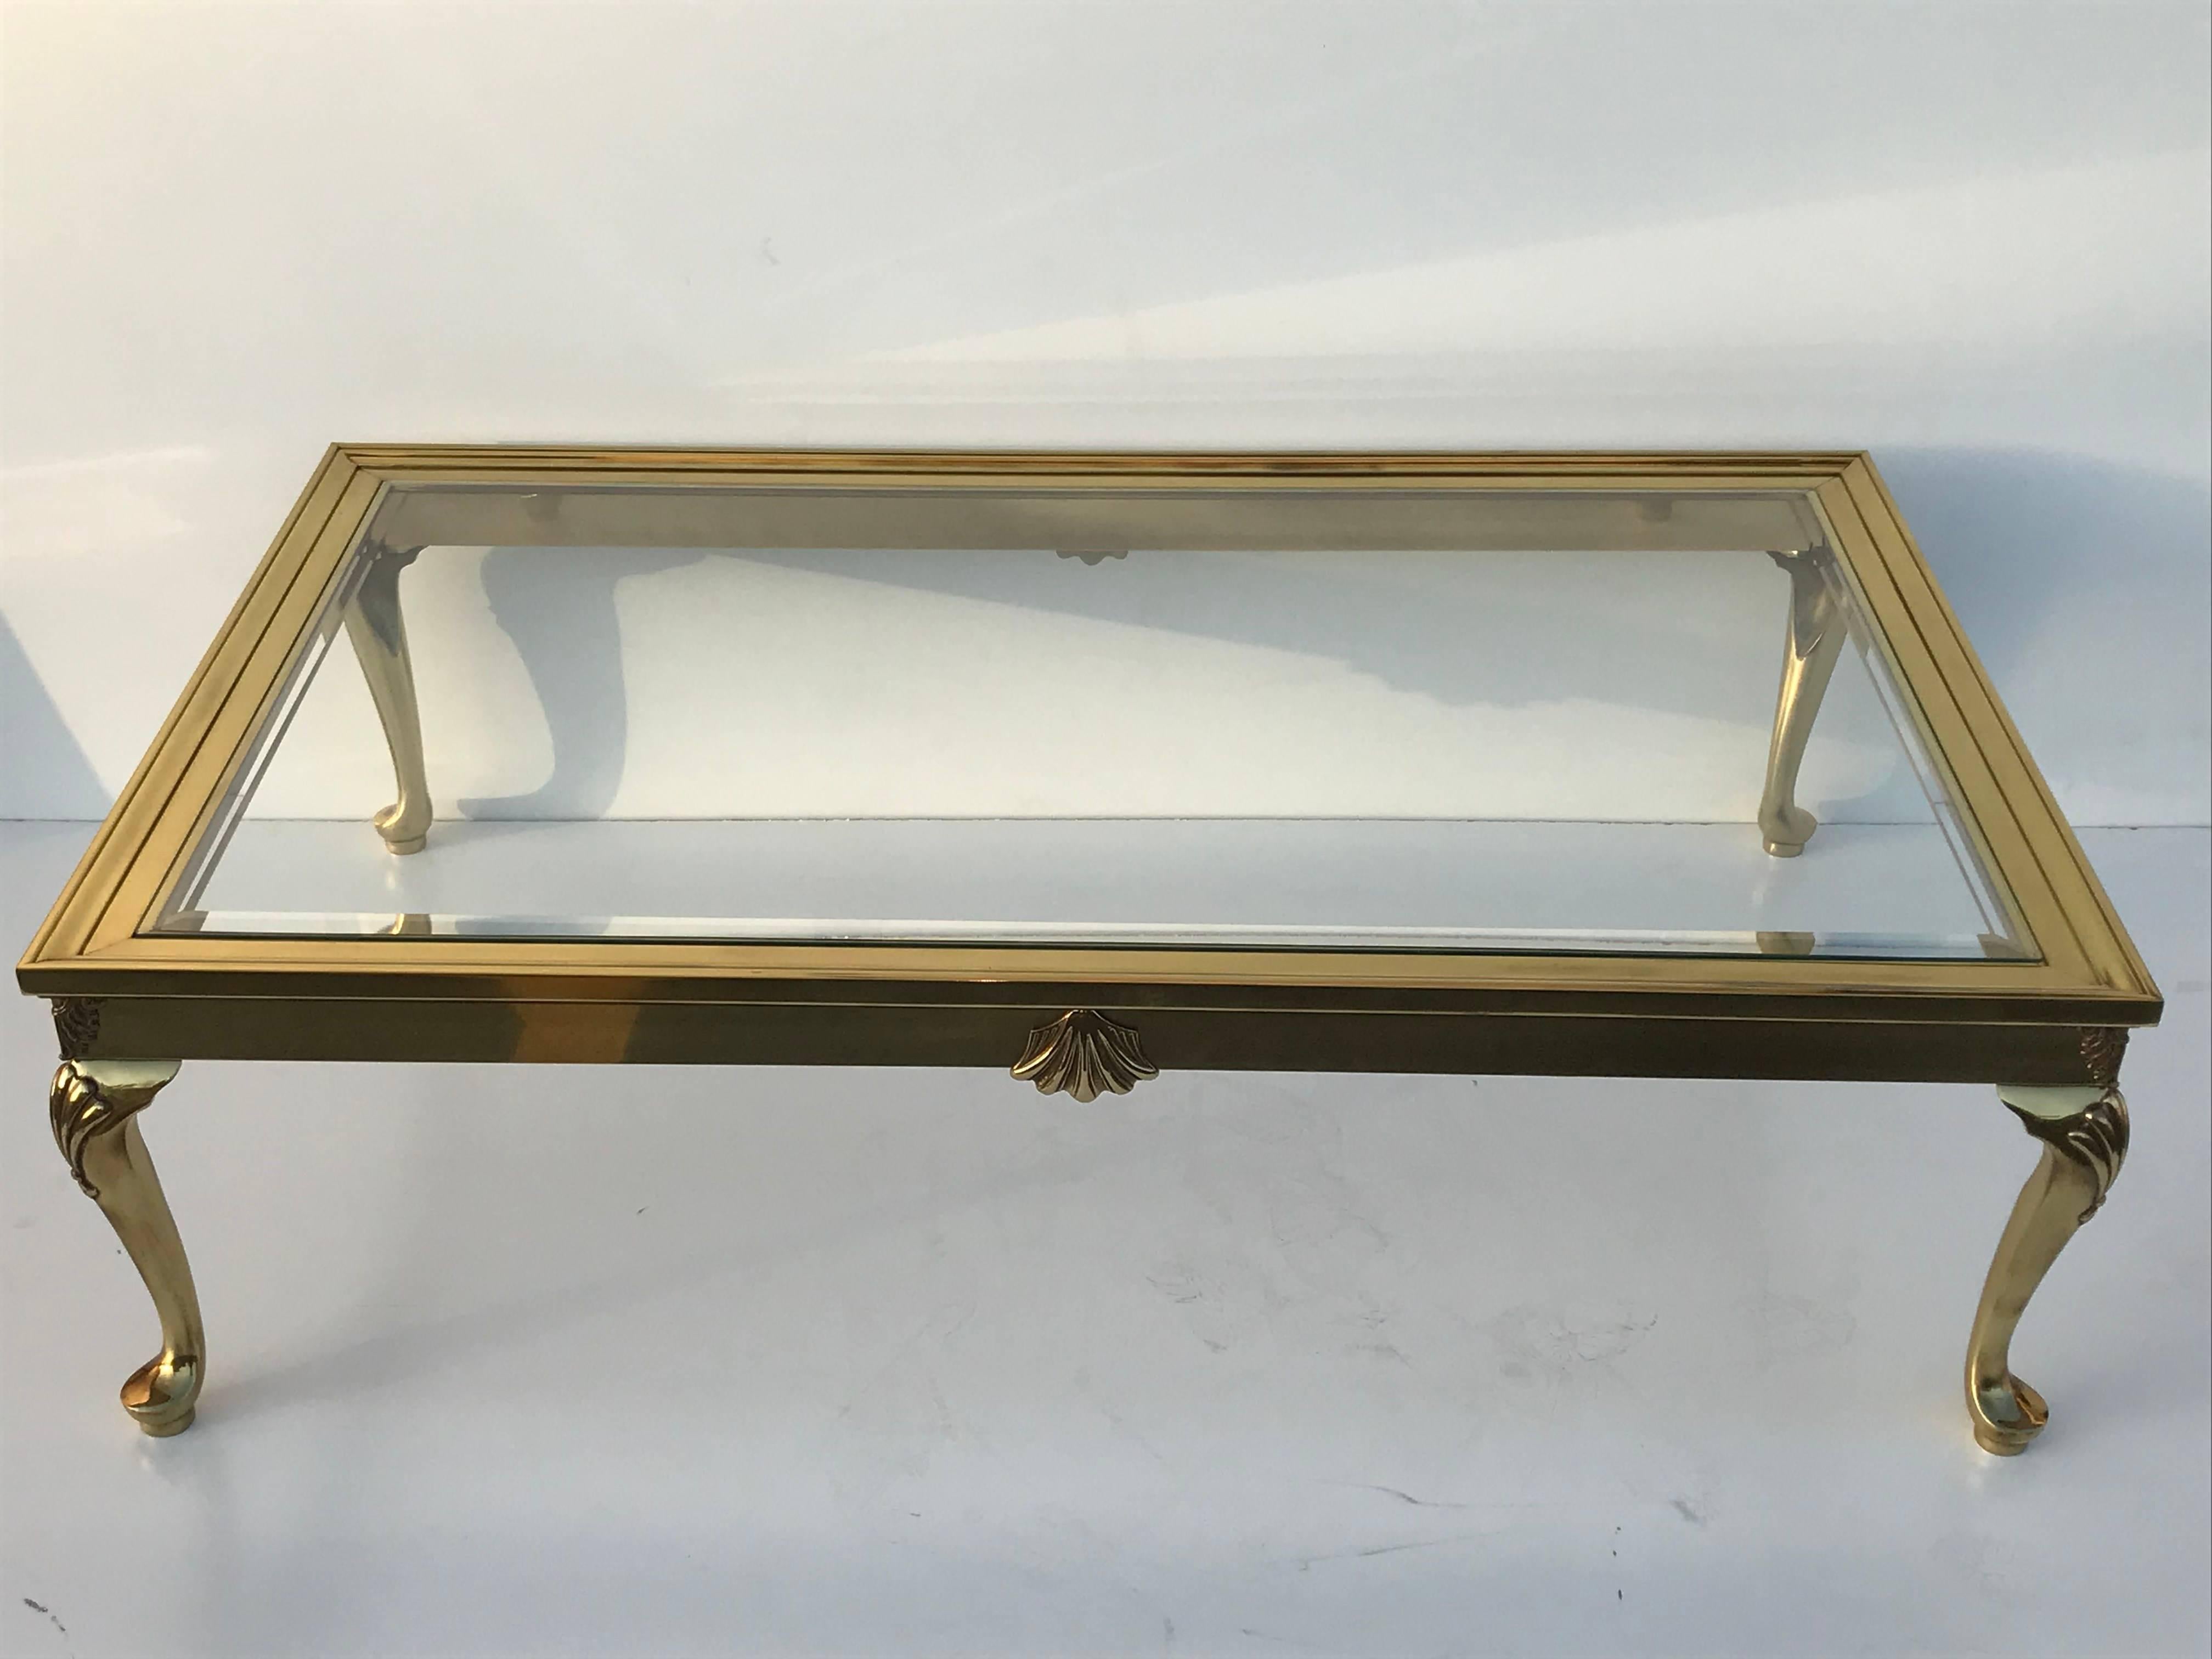 Cabriolet leg brass coffee table with bevelled glass top.